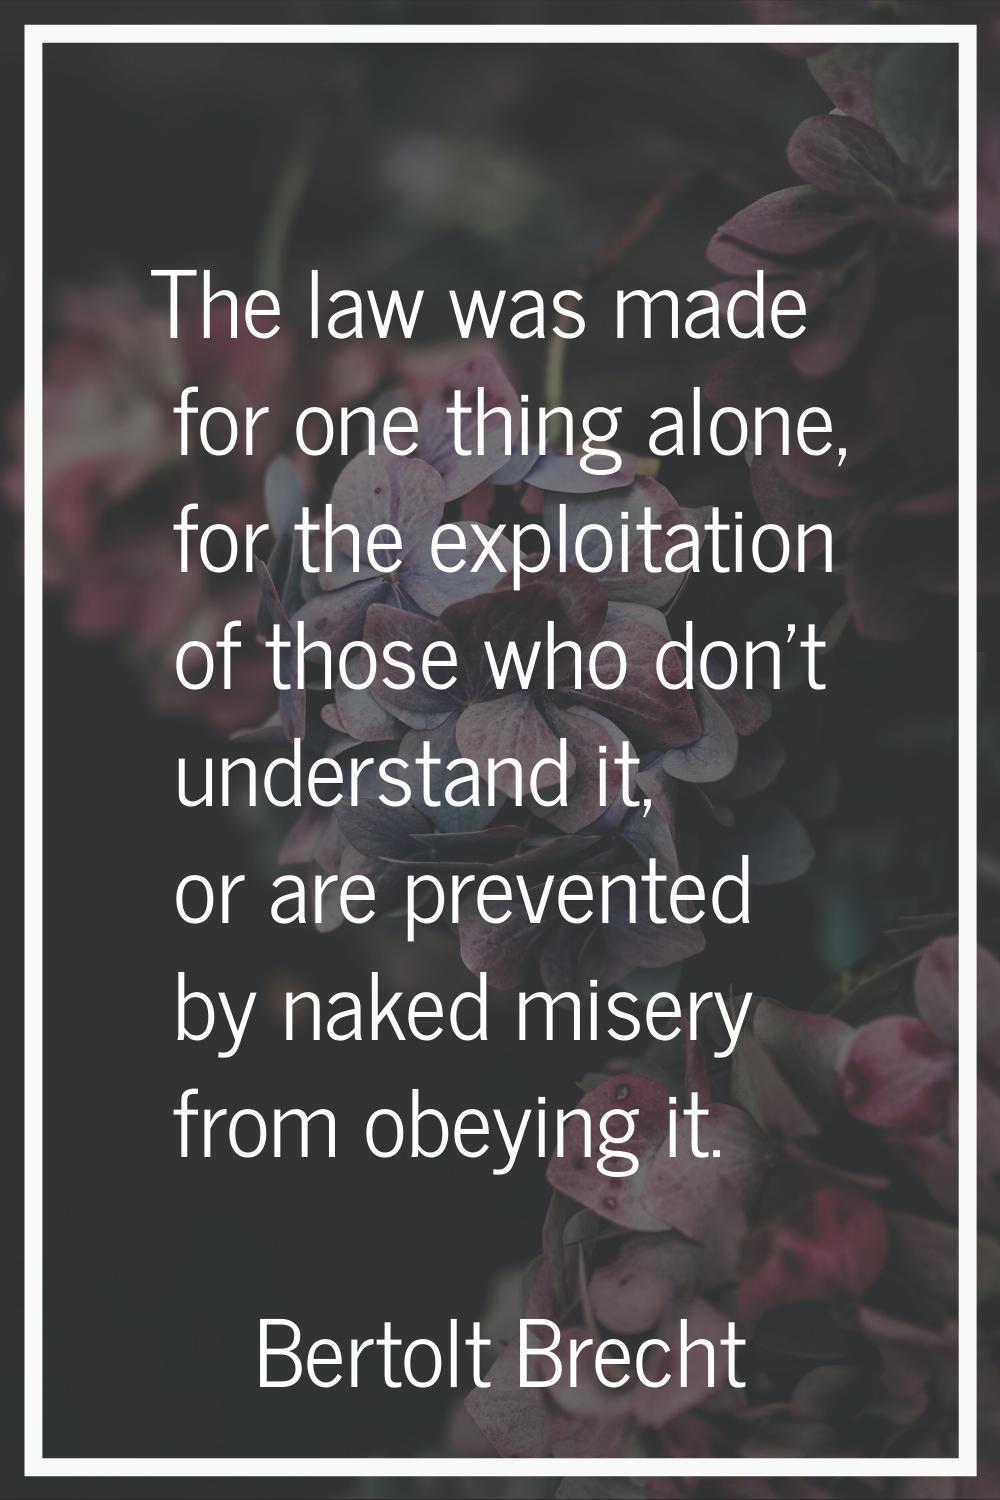 The law was made for one thing alone, for the exploitation of those who don't understand it, or are